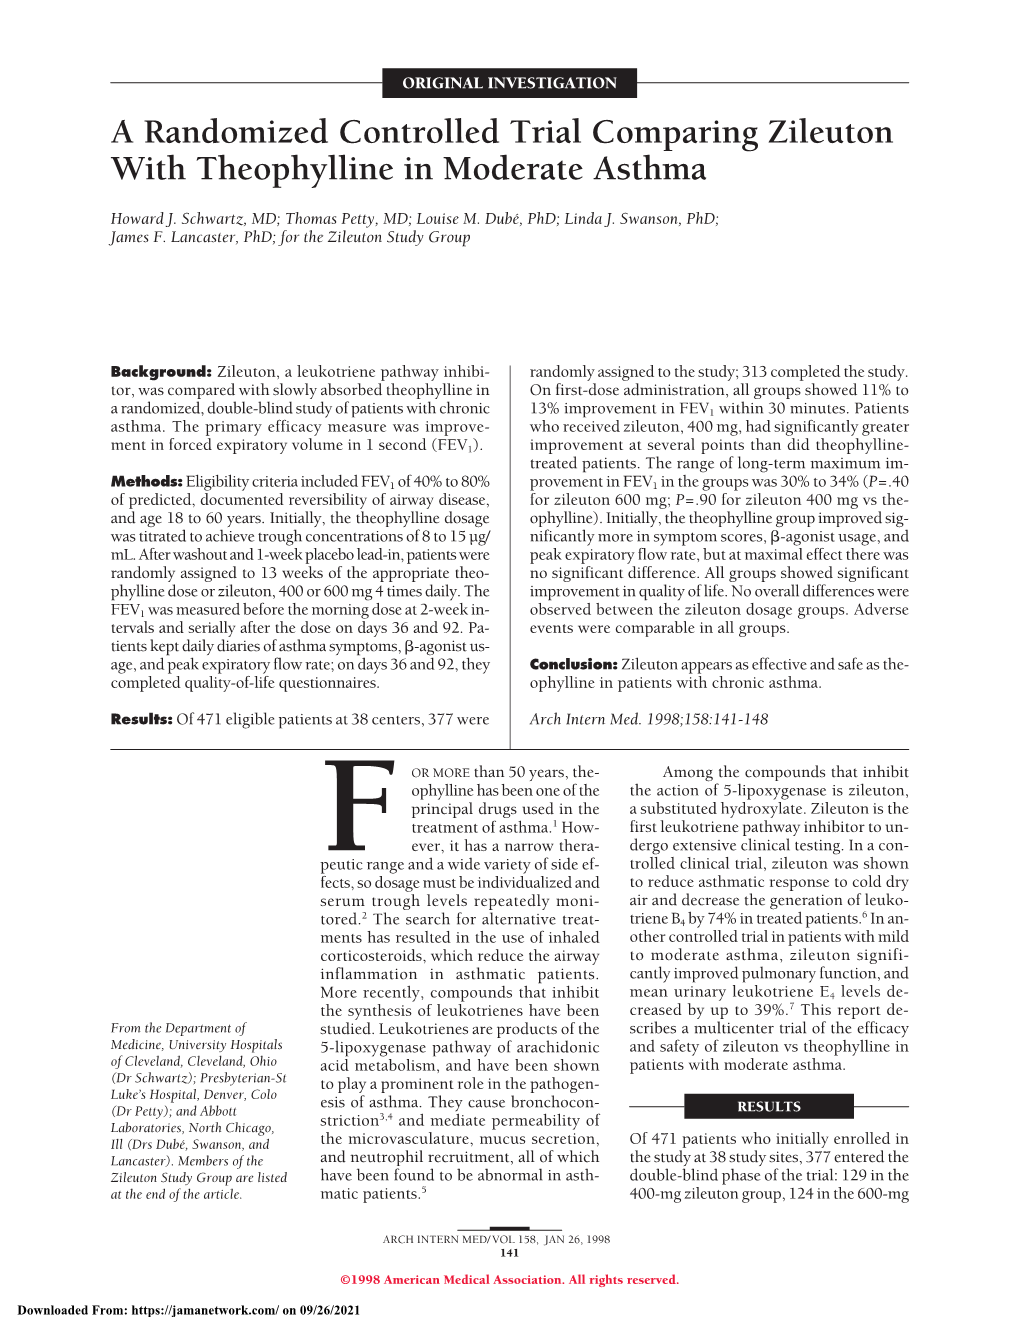 A Randomized Controlled Trial Comparing Zileuton with Theophylline in Moderate Asthma